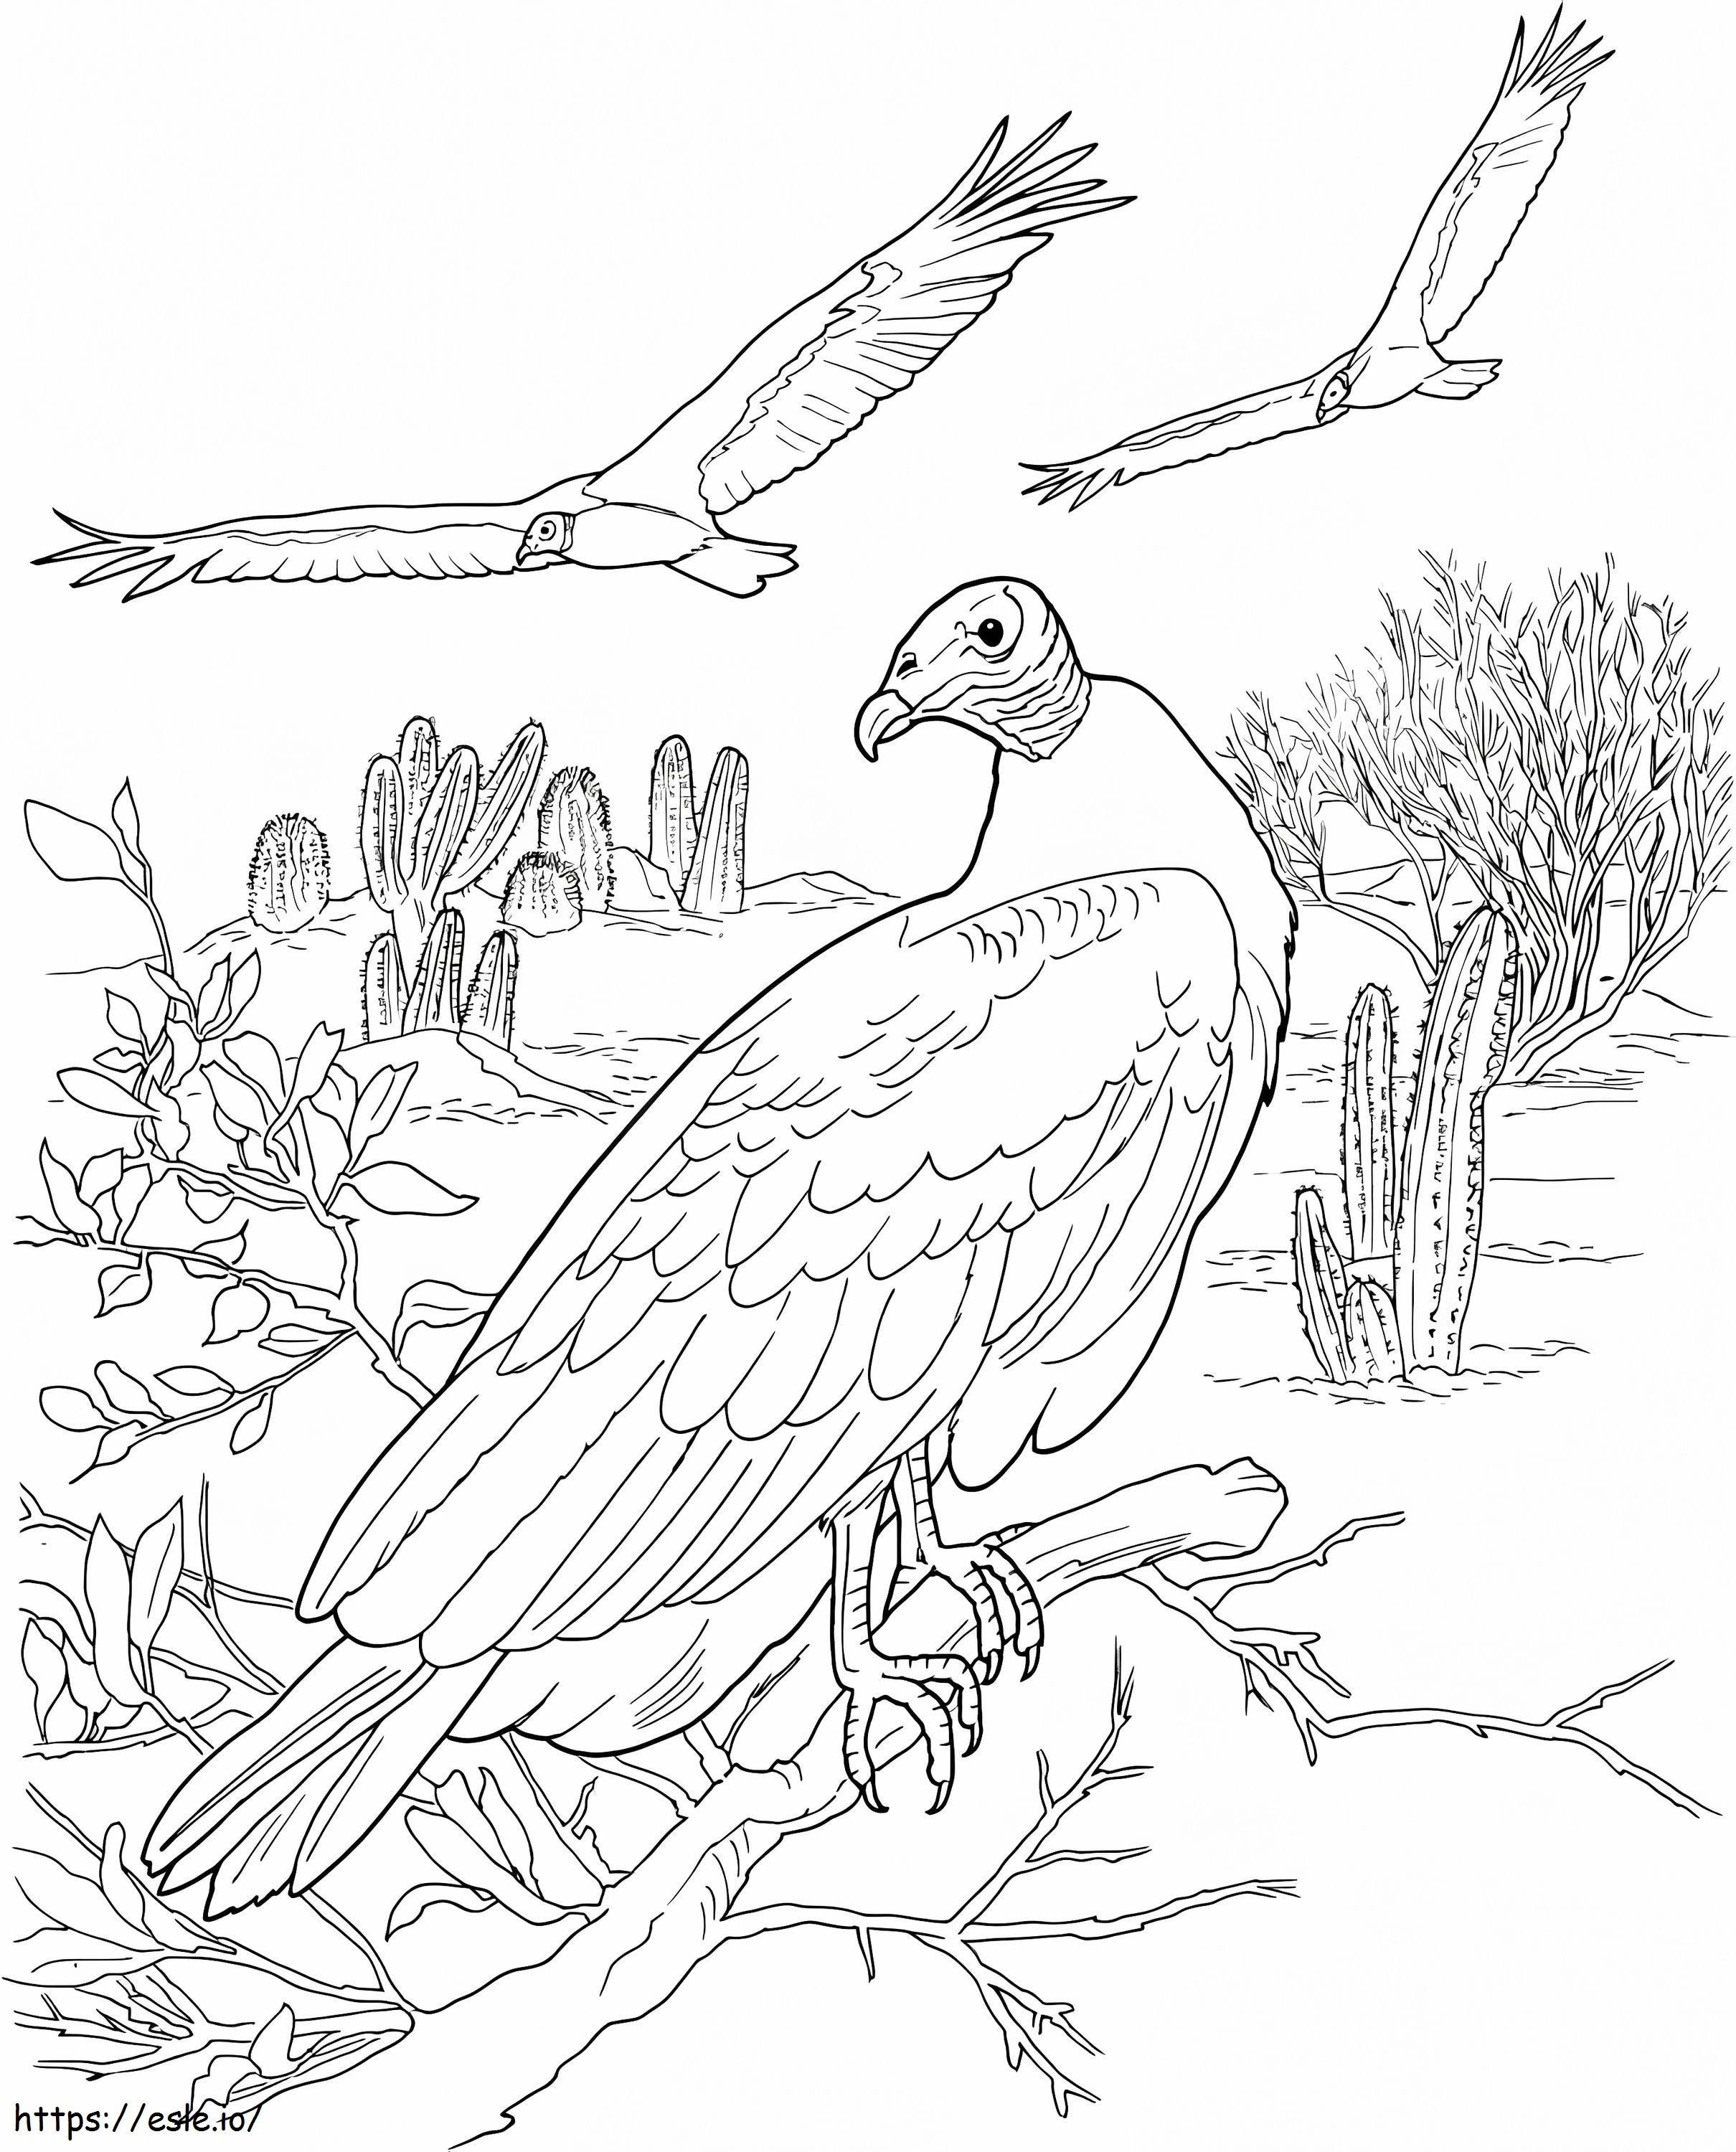 Turkey Vultures coloring page